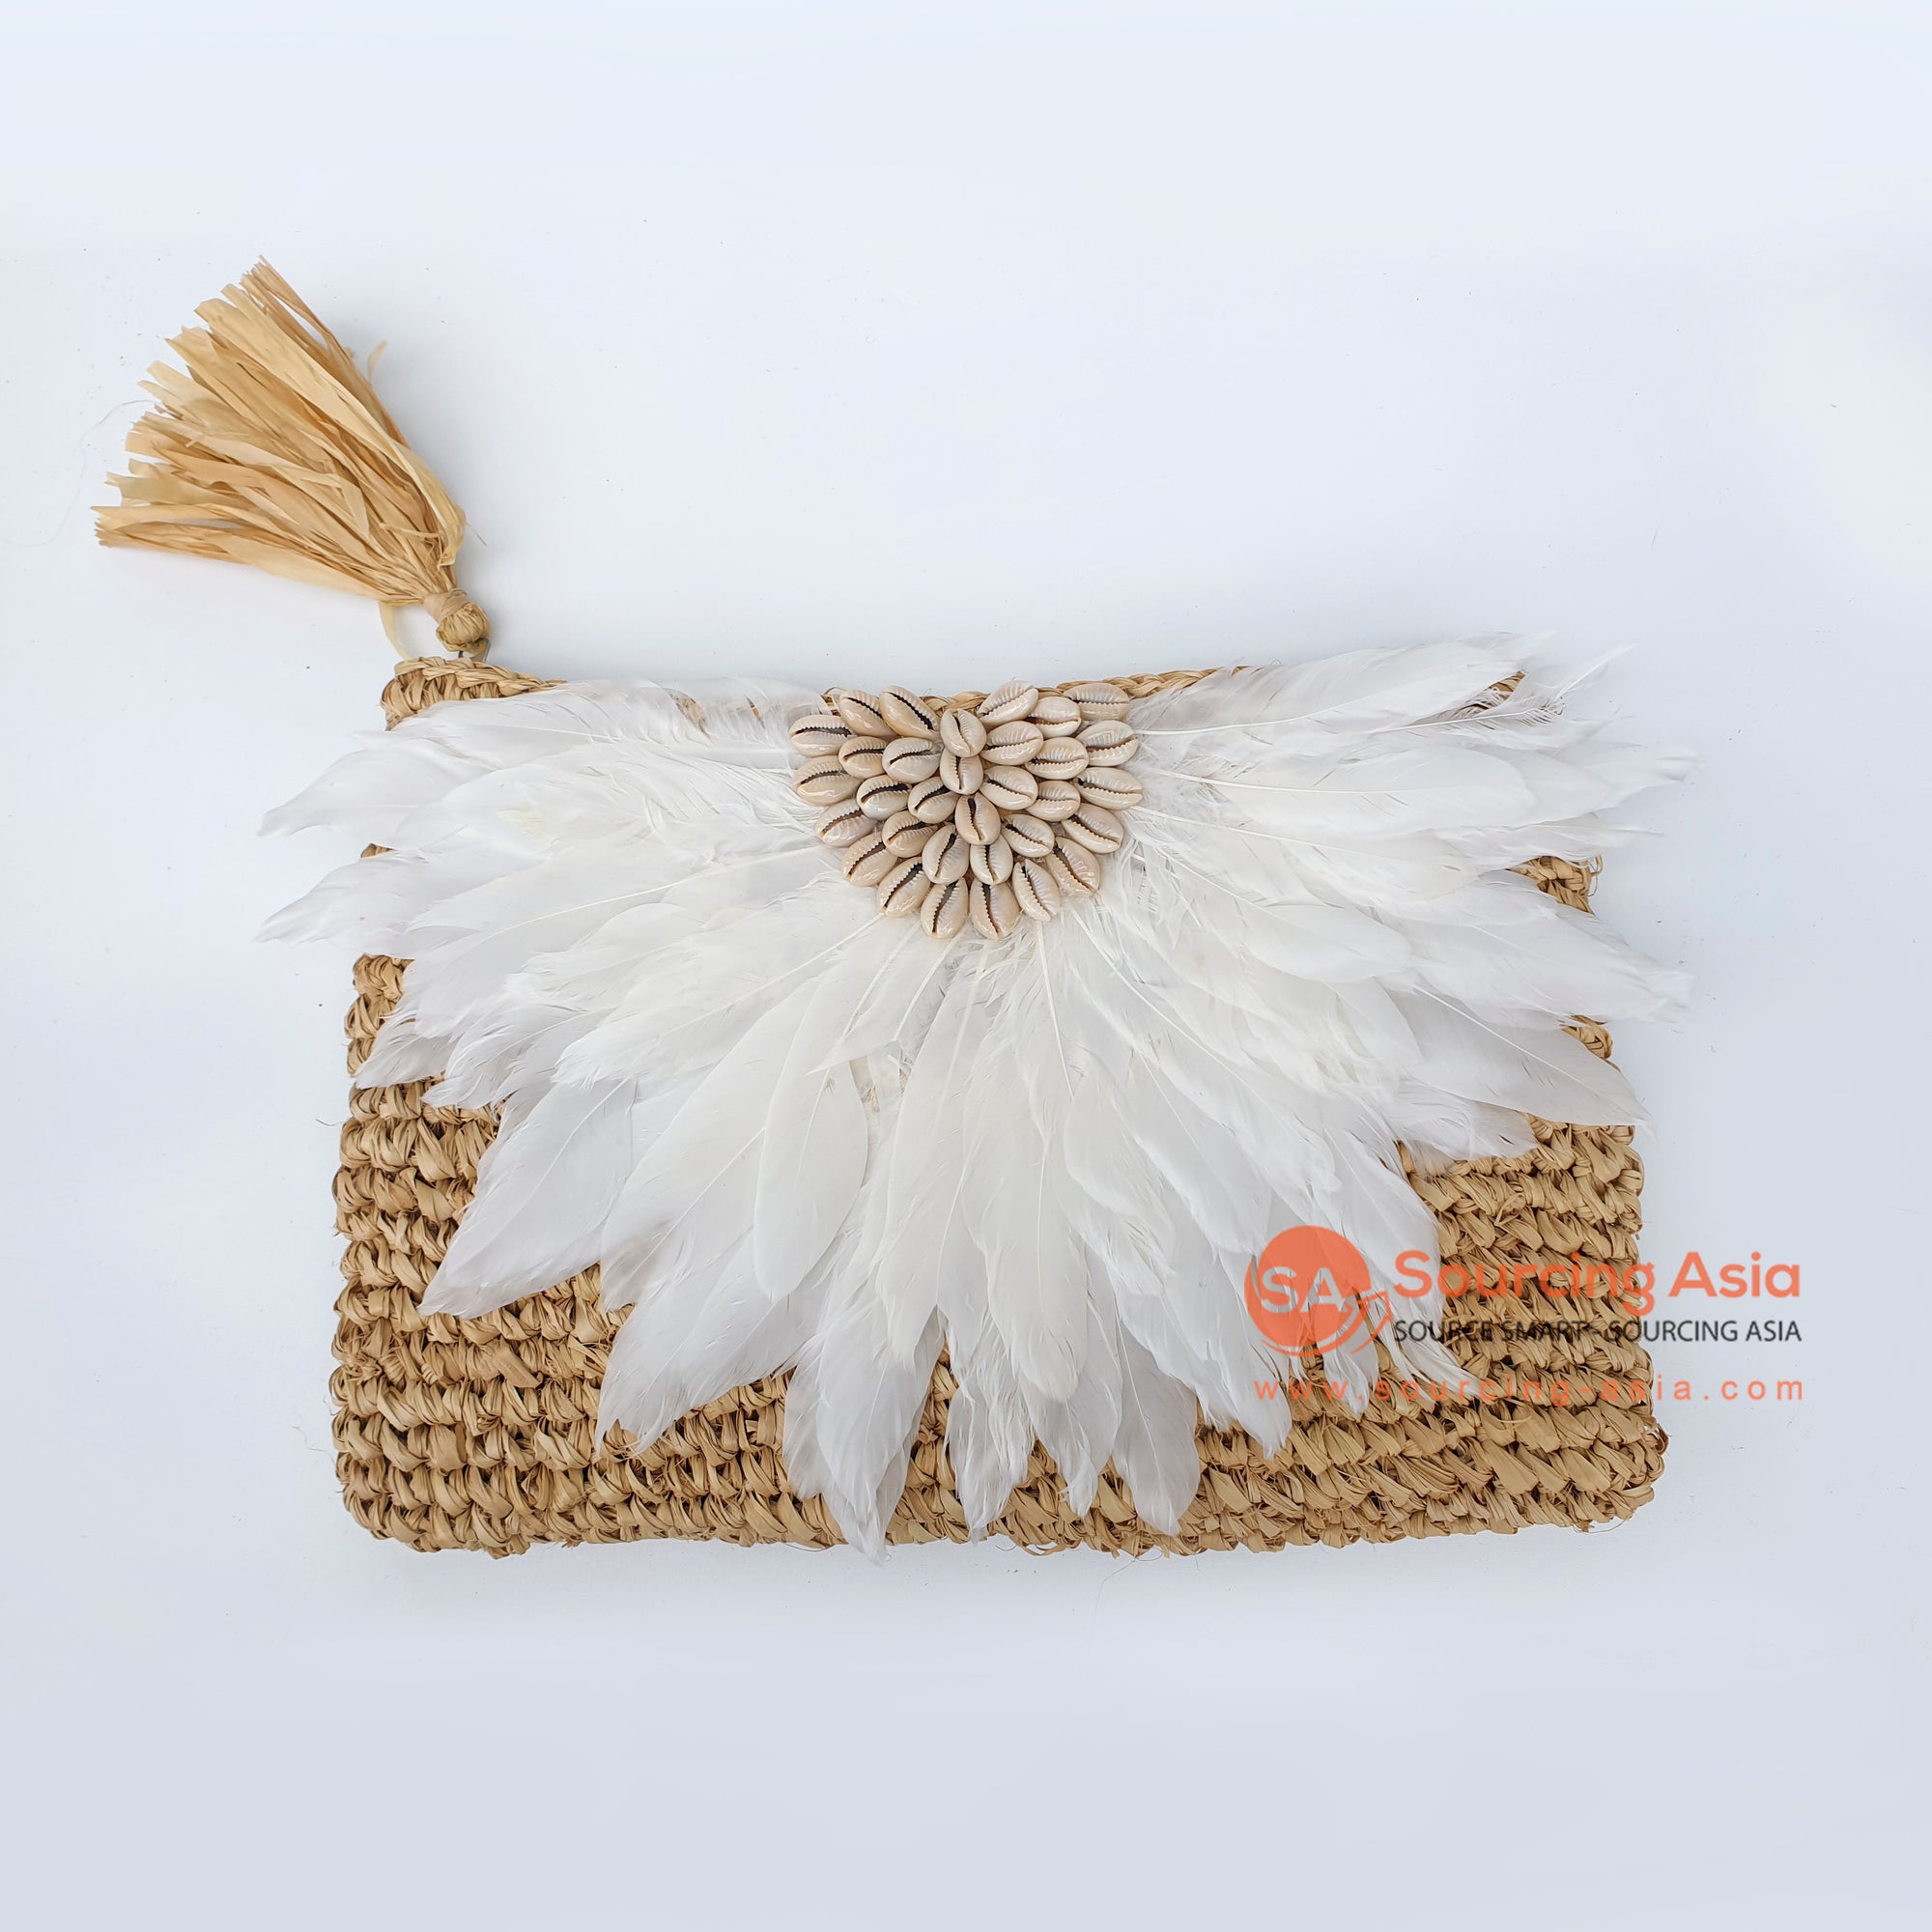 DHL090 NATURAL WATER HYACINTH, SHELL, AND WHITE FEATHERS PURSE